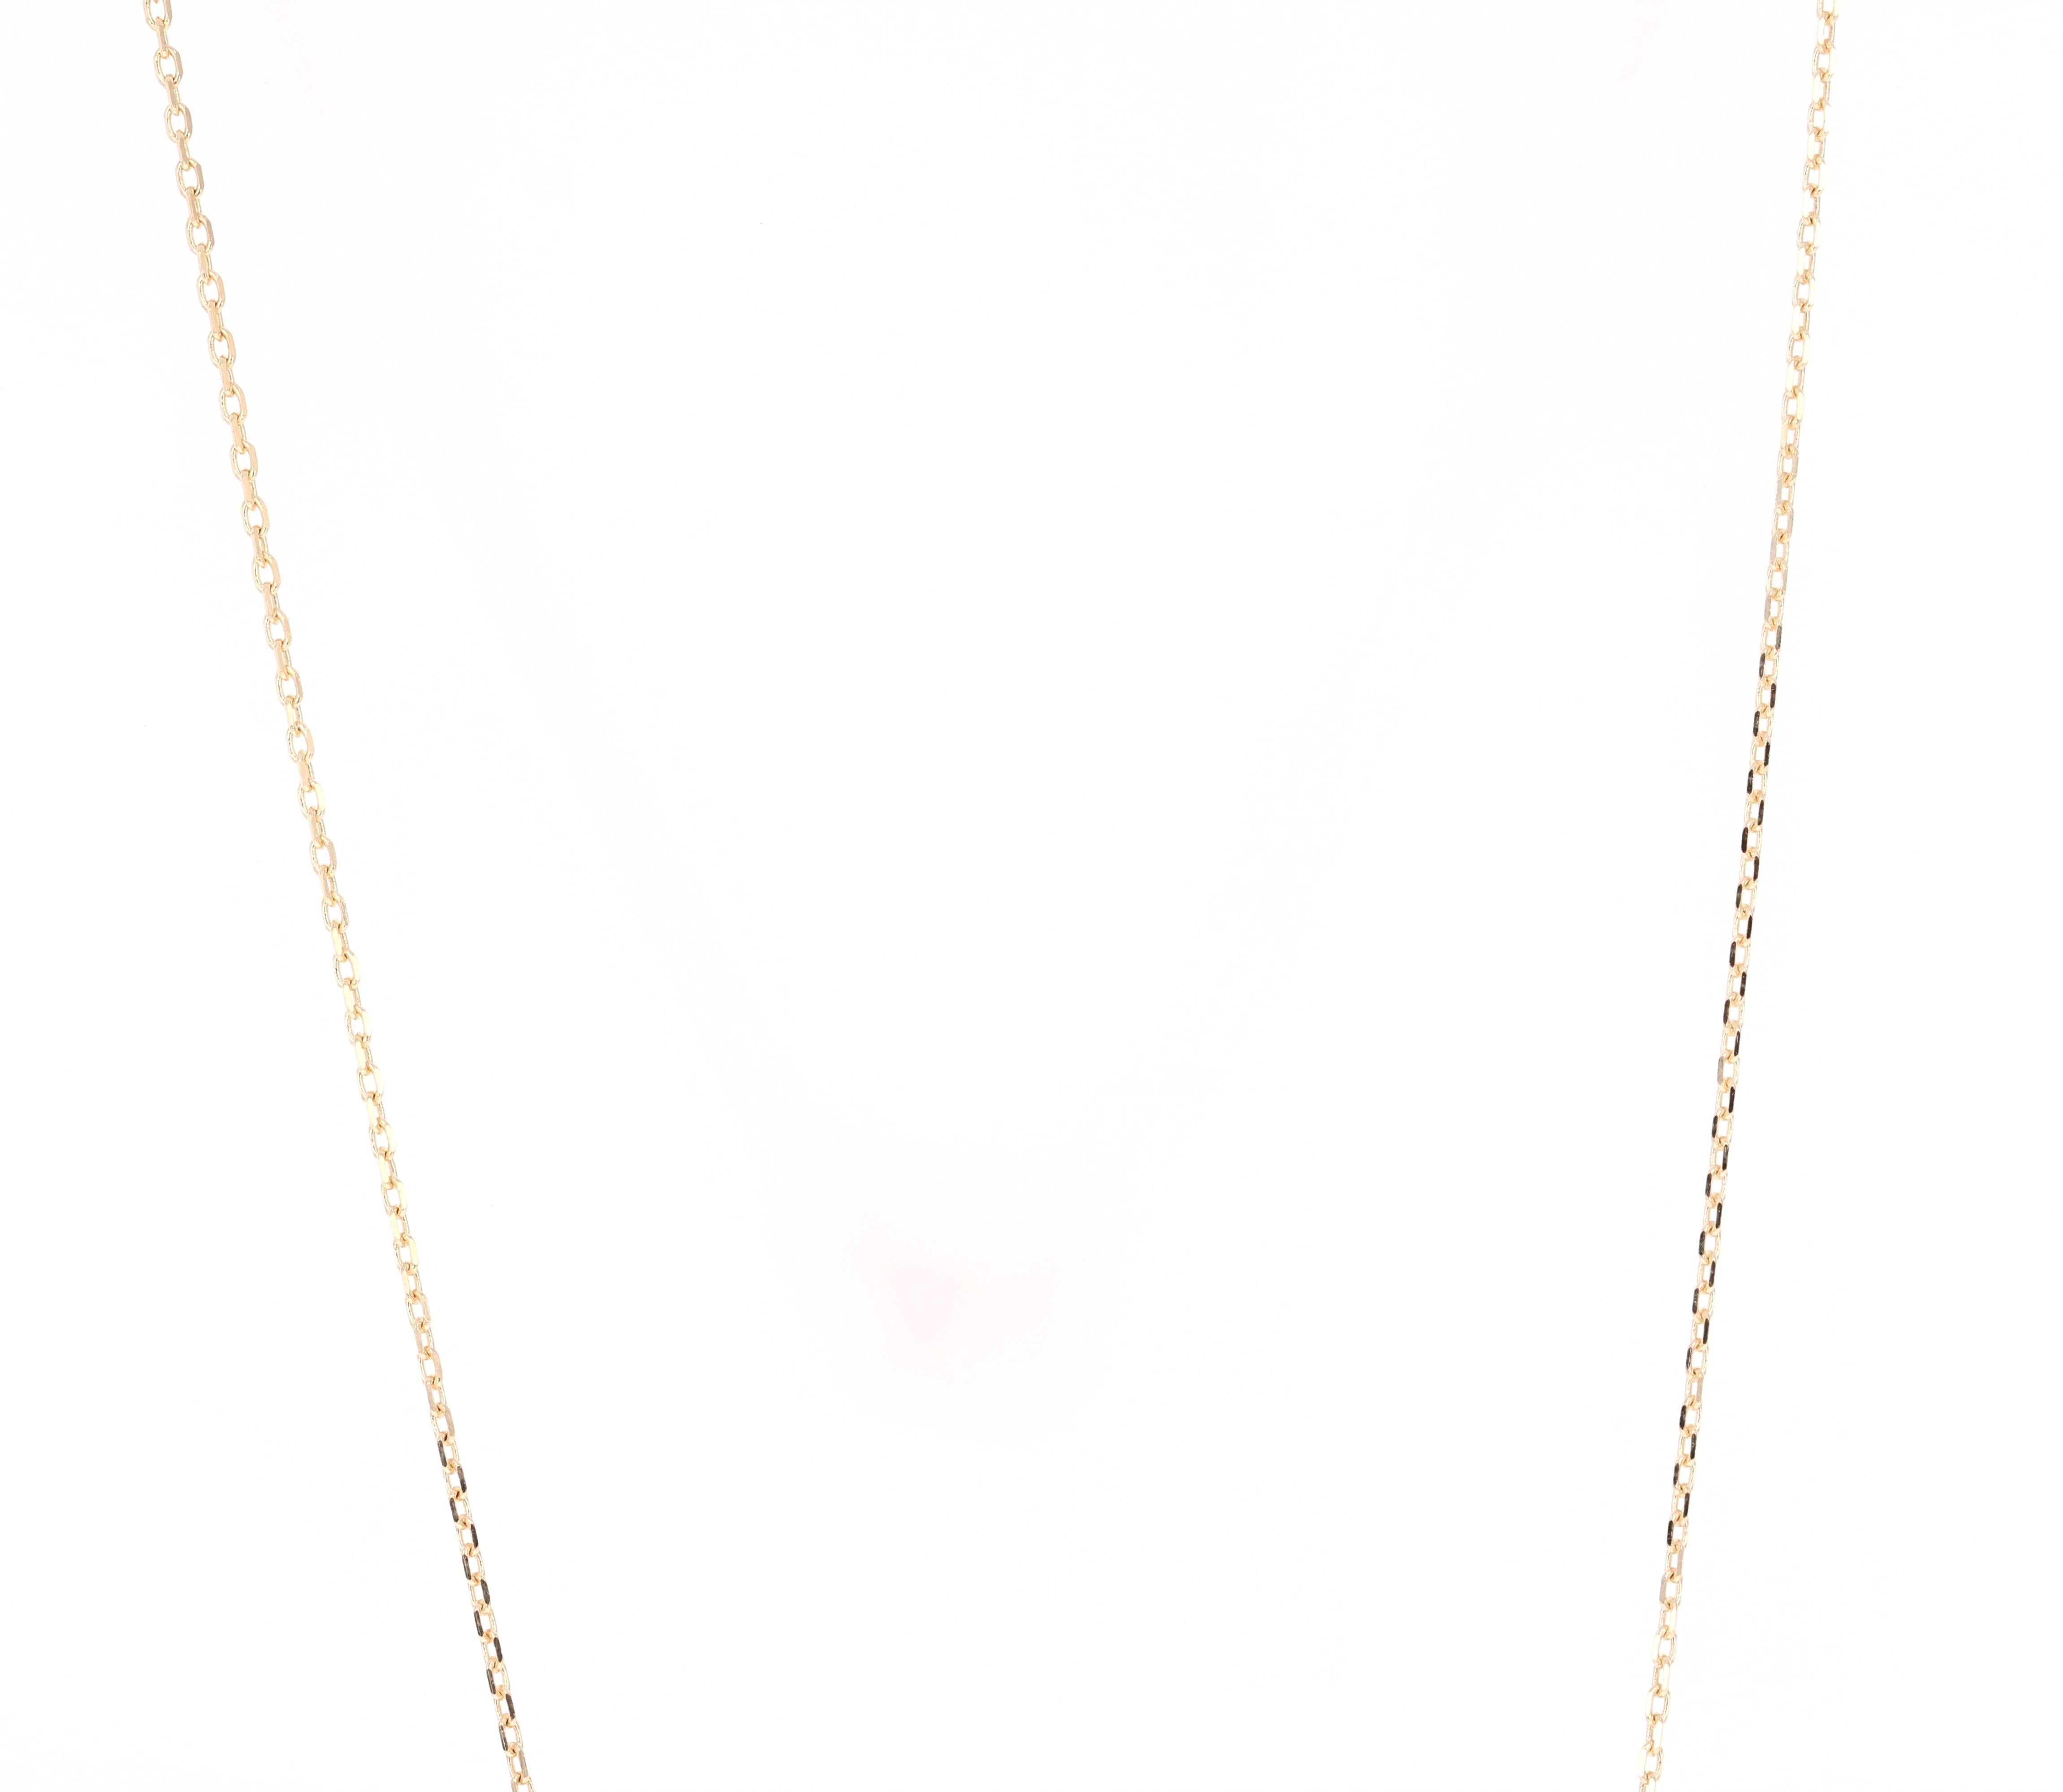 Beautiful, Bold and yet Dainty..

This Chain Necklace has a U-Shaped Pendant that has 13 Round Cut Diamonds (Clarity: SI, Color: F) that weigh 0.51 Carats. The total carat weight of the Pendant is 0.51 Carats.

It is beautifully curated in 14 Karat